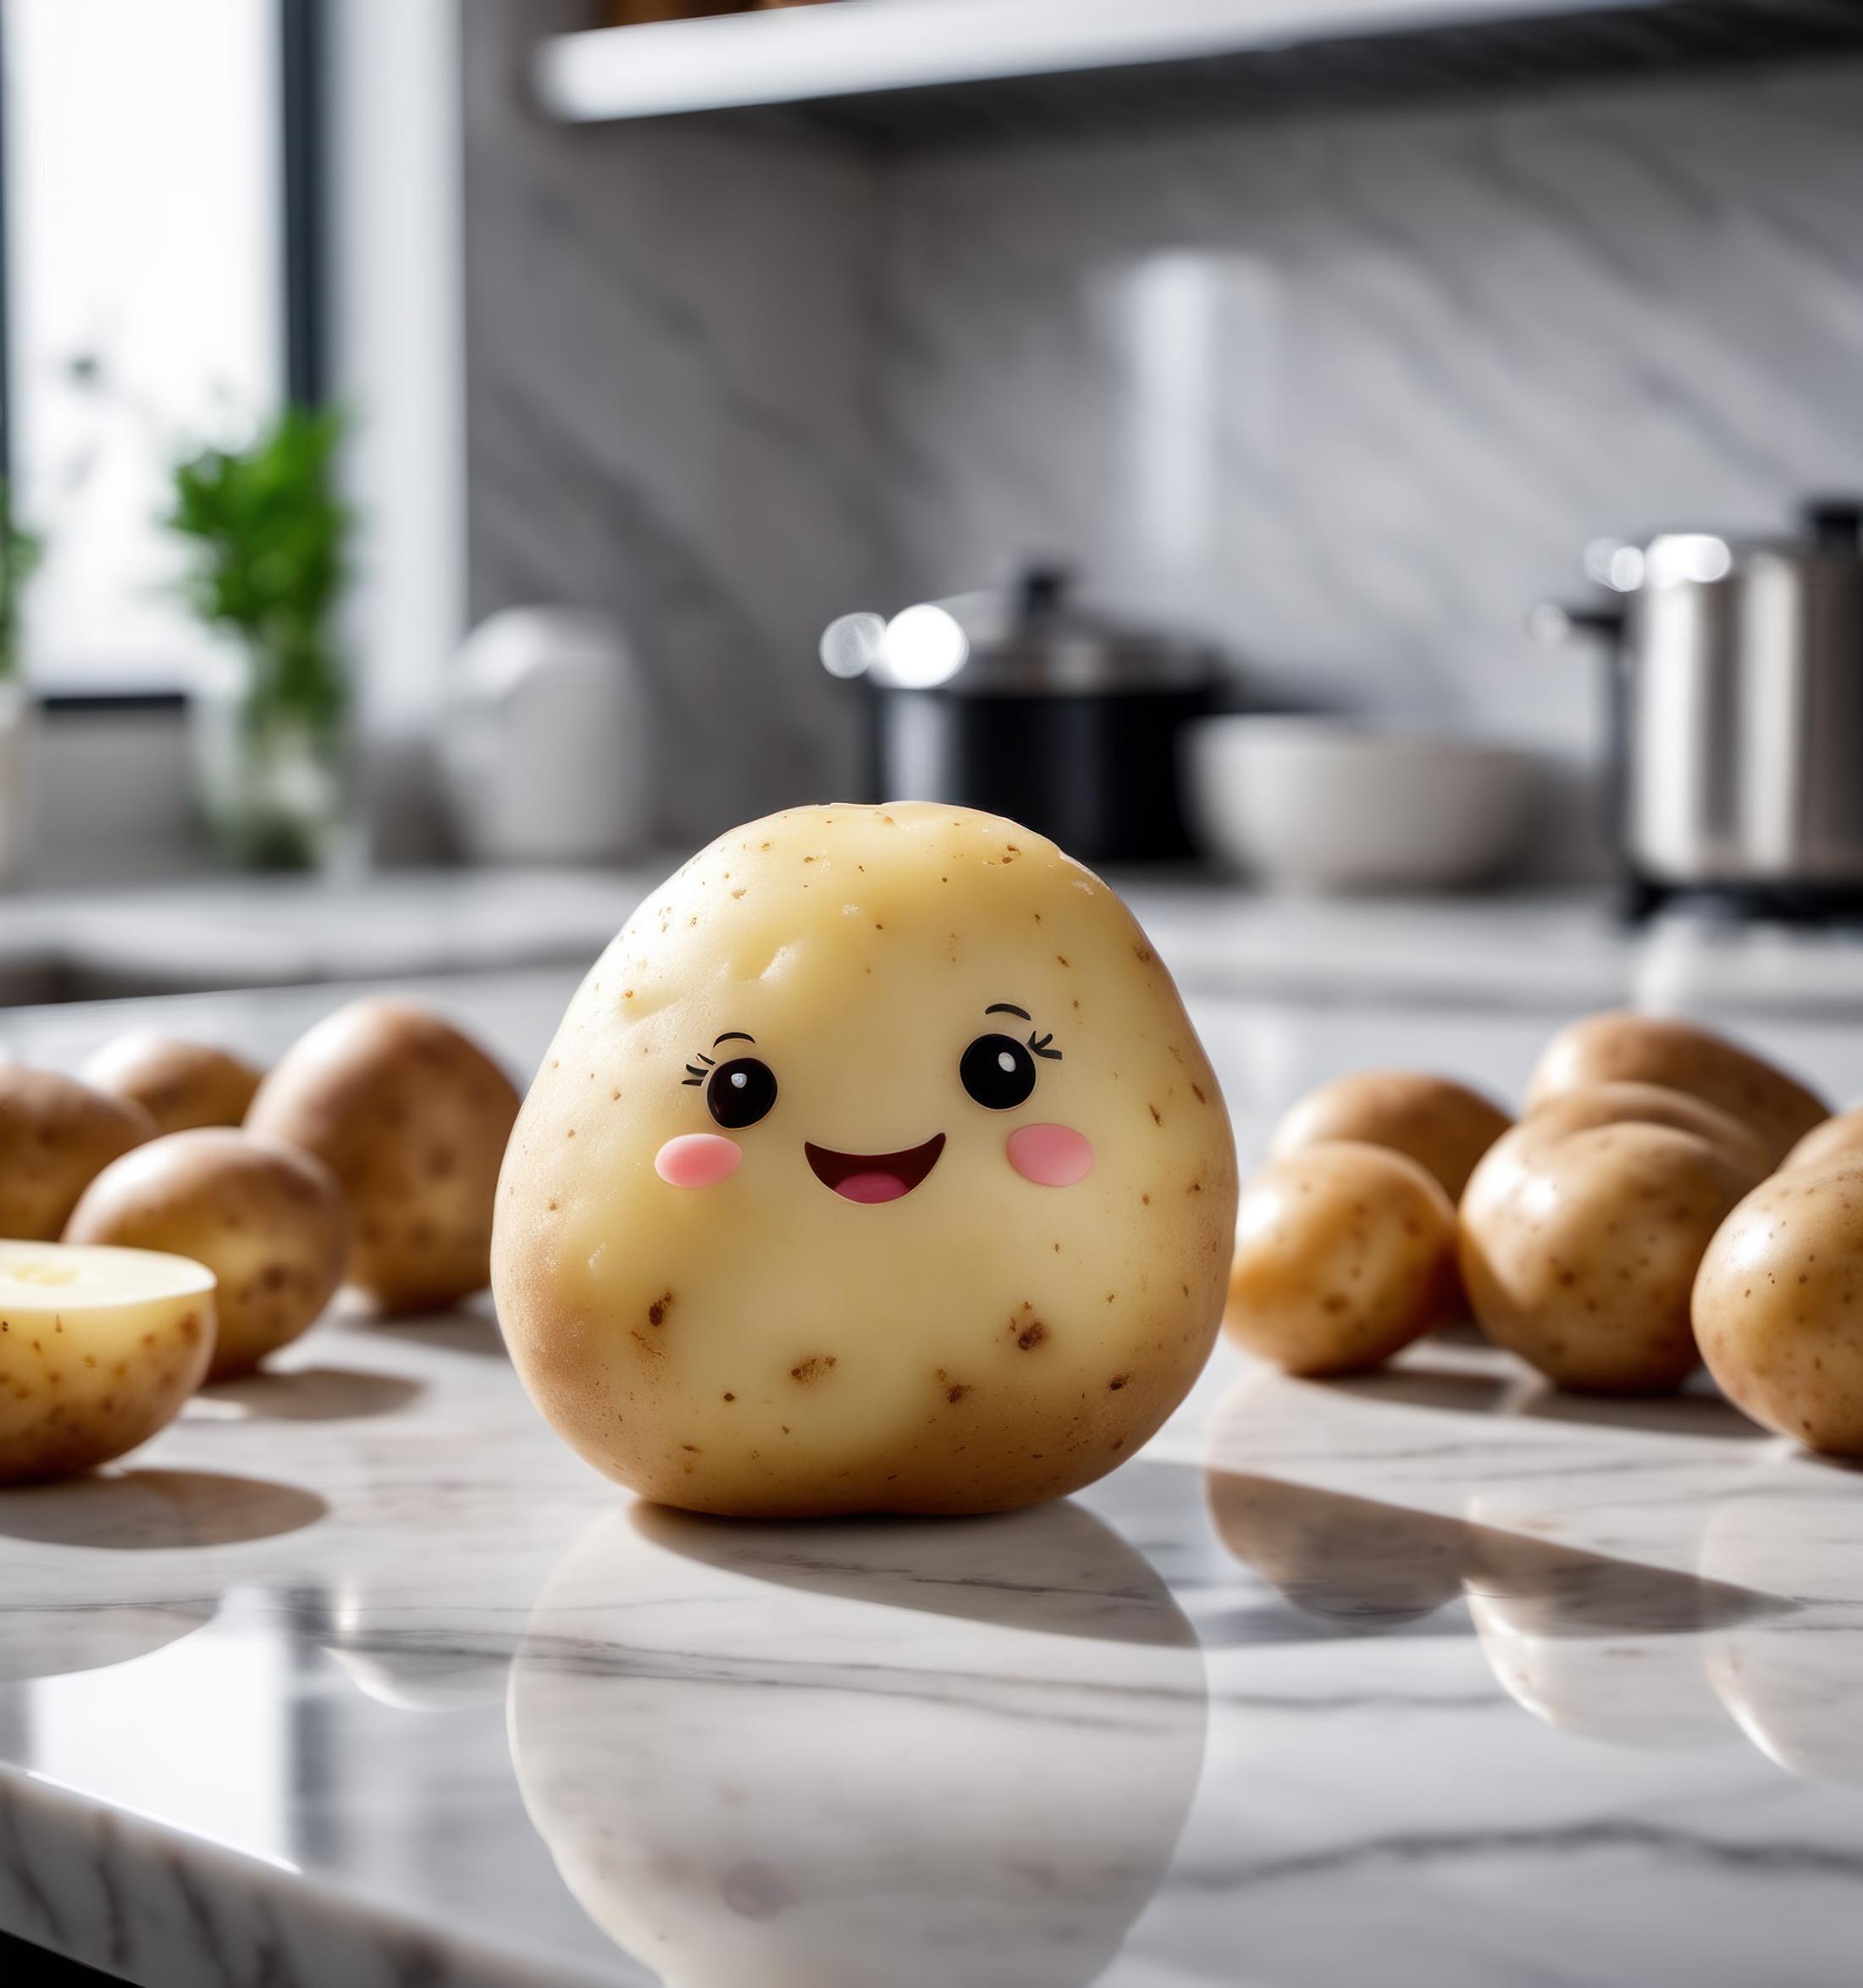 A Smiley Potato Toy Sitting on a Counter Among Real Potatoes